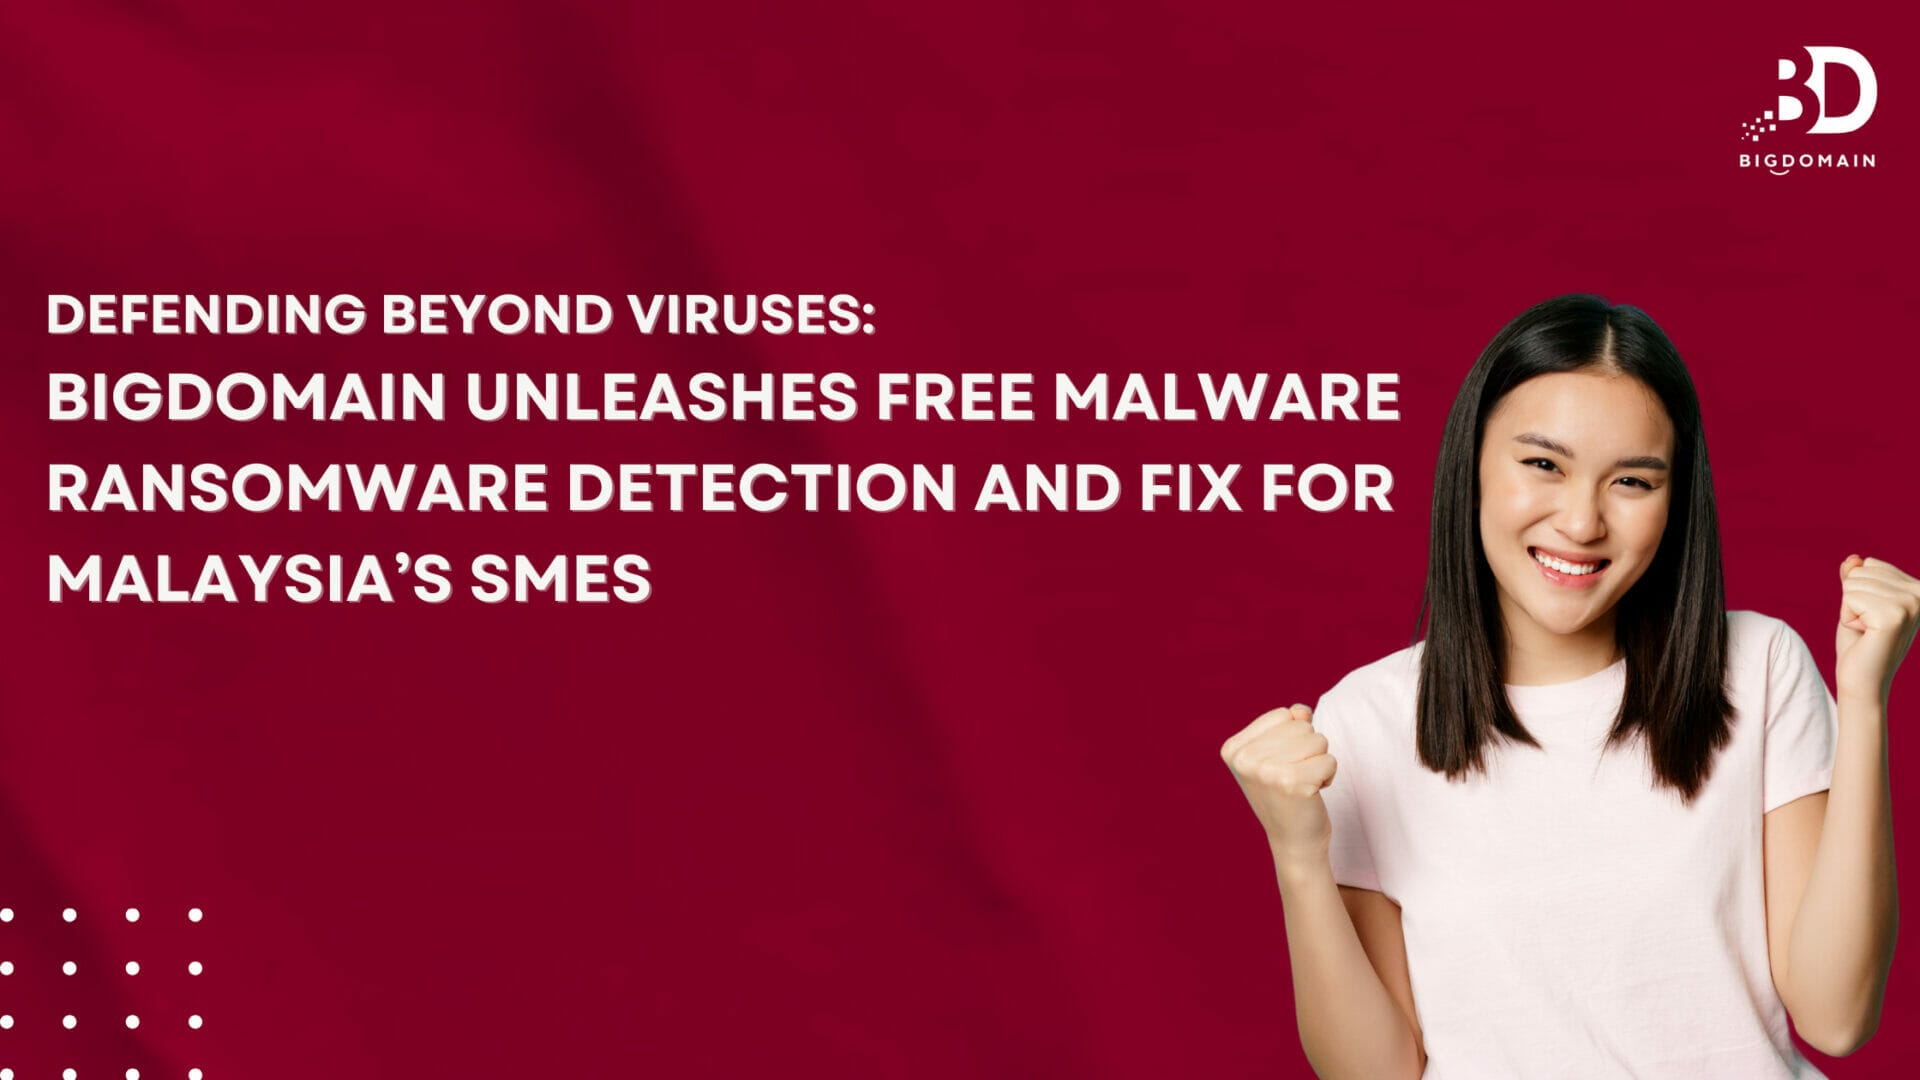 Defending Beyond Viruses: Bigdomain Unleashes Free Malware Ransomware Detection and Fix for Malaysia’s SMEs